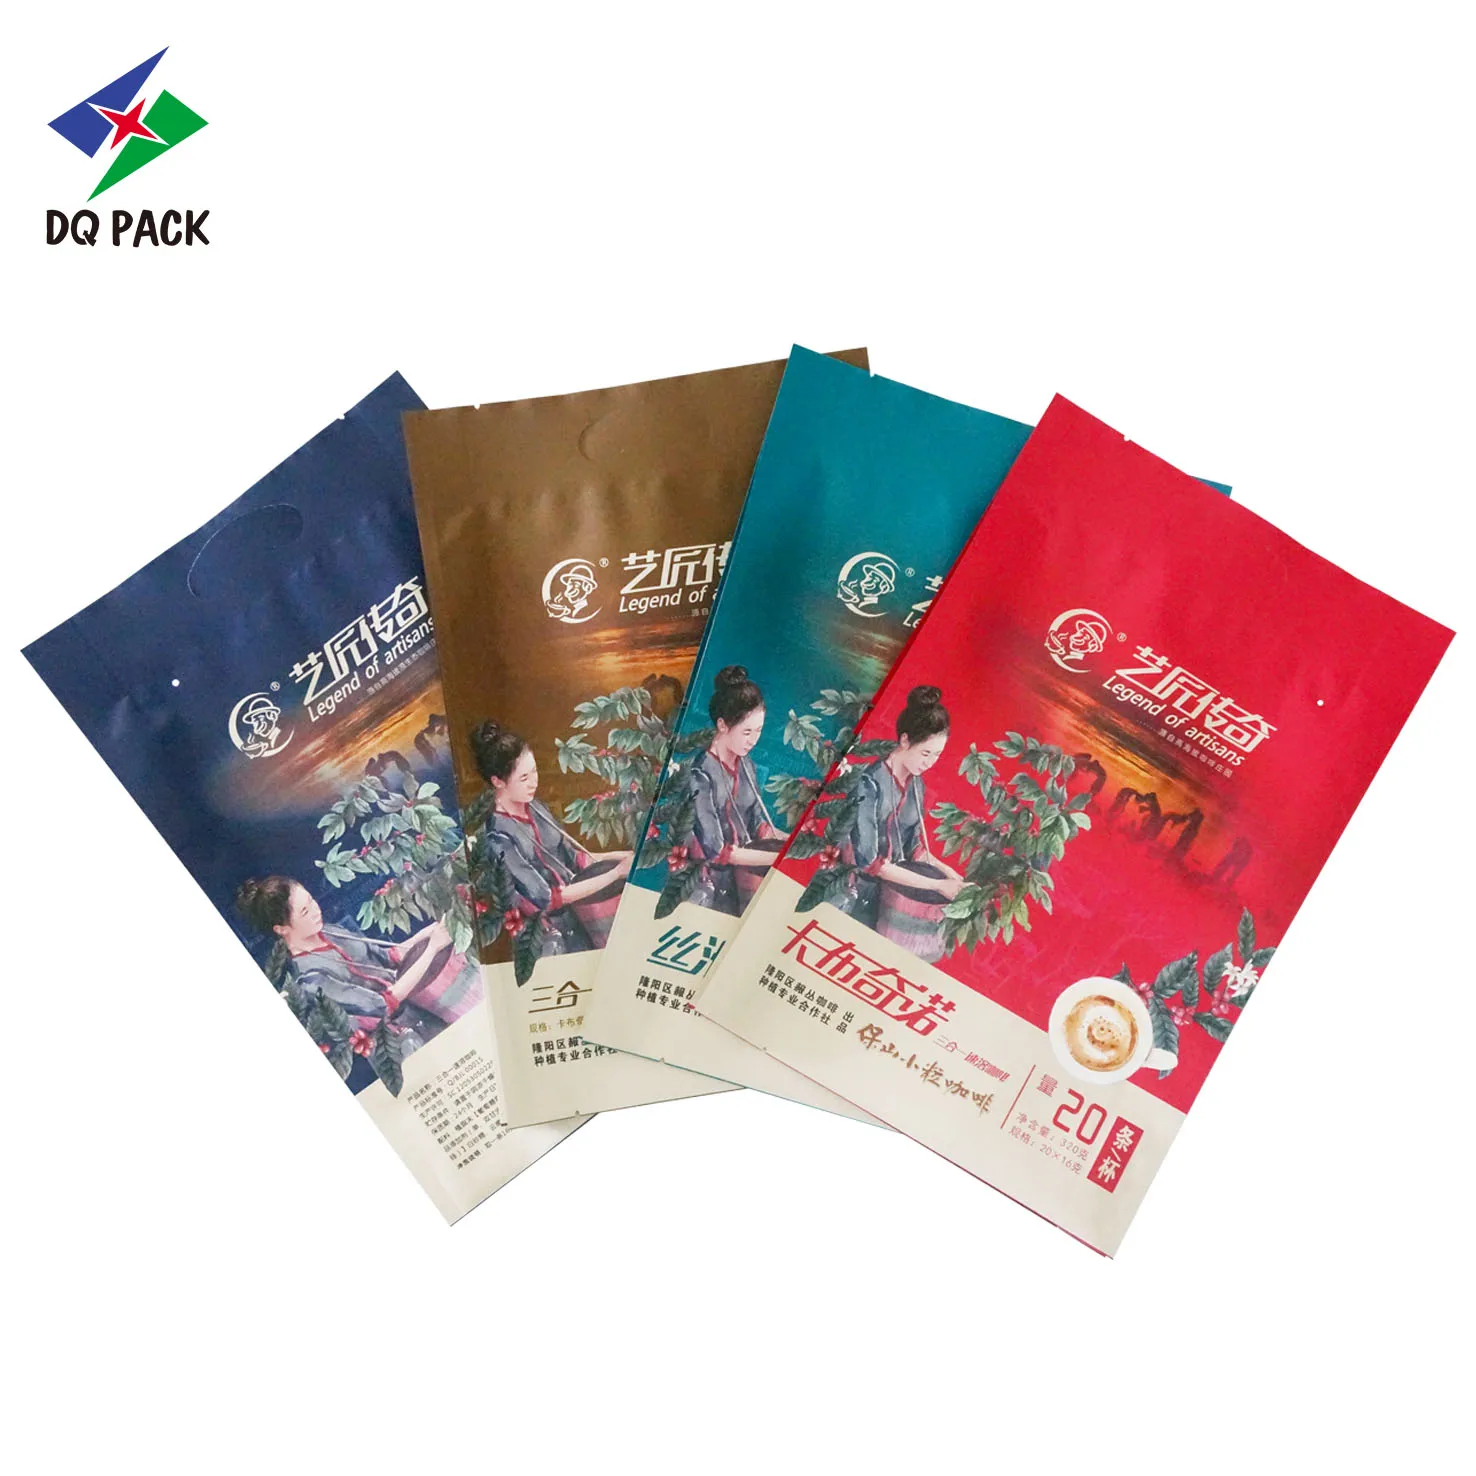 DQ PACK Free samples Flexible packaging Aluminium with gusseted pouch for coffee